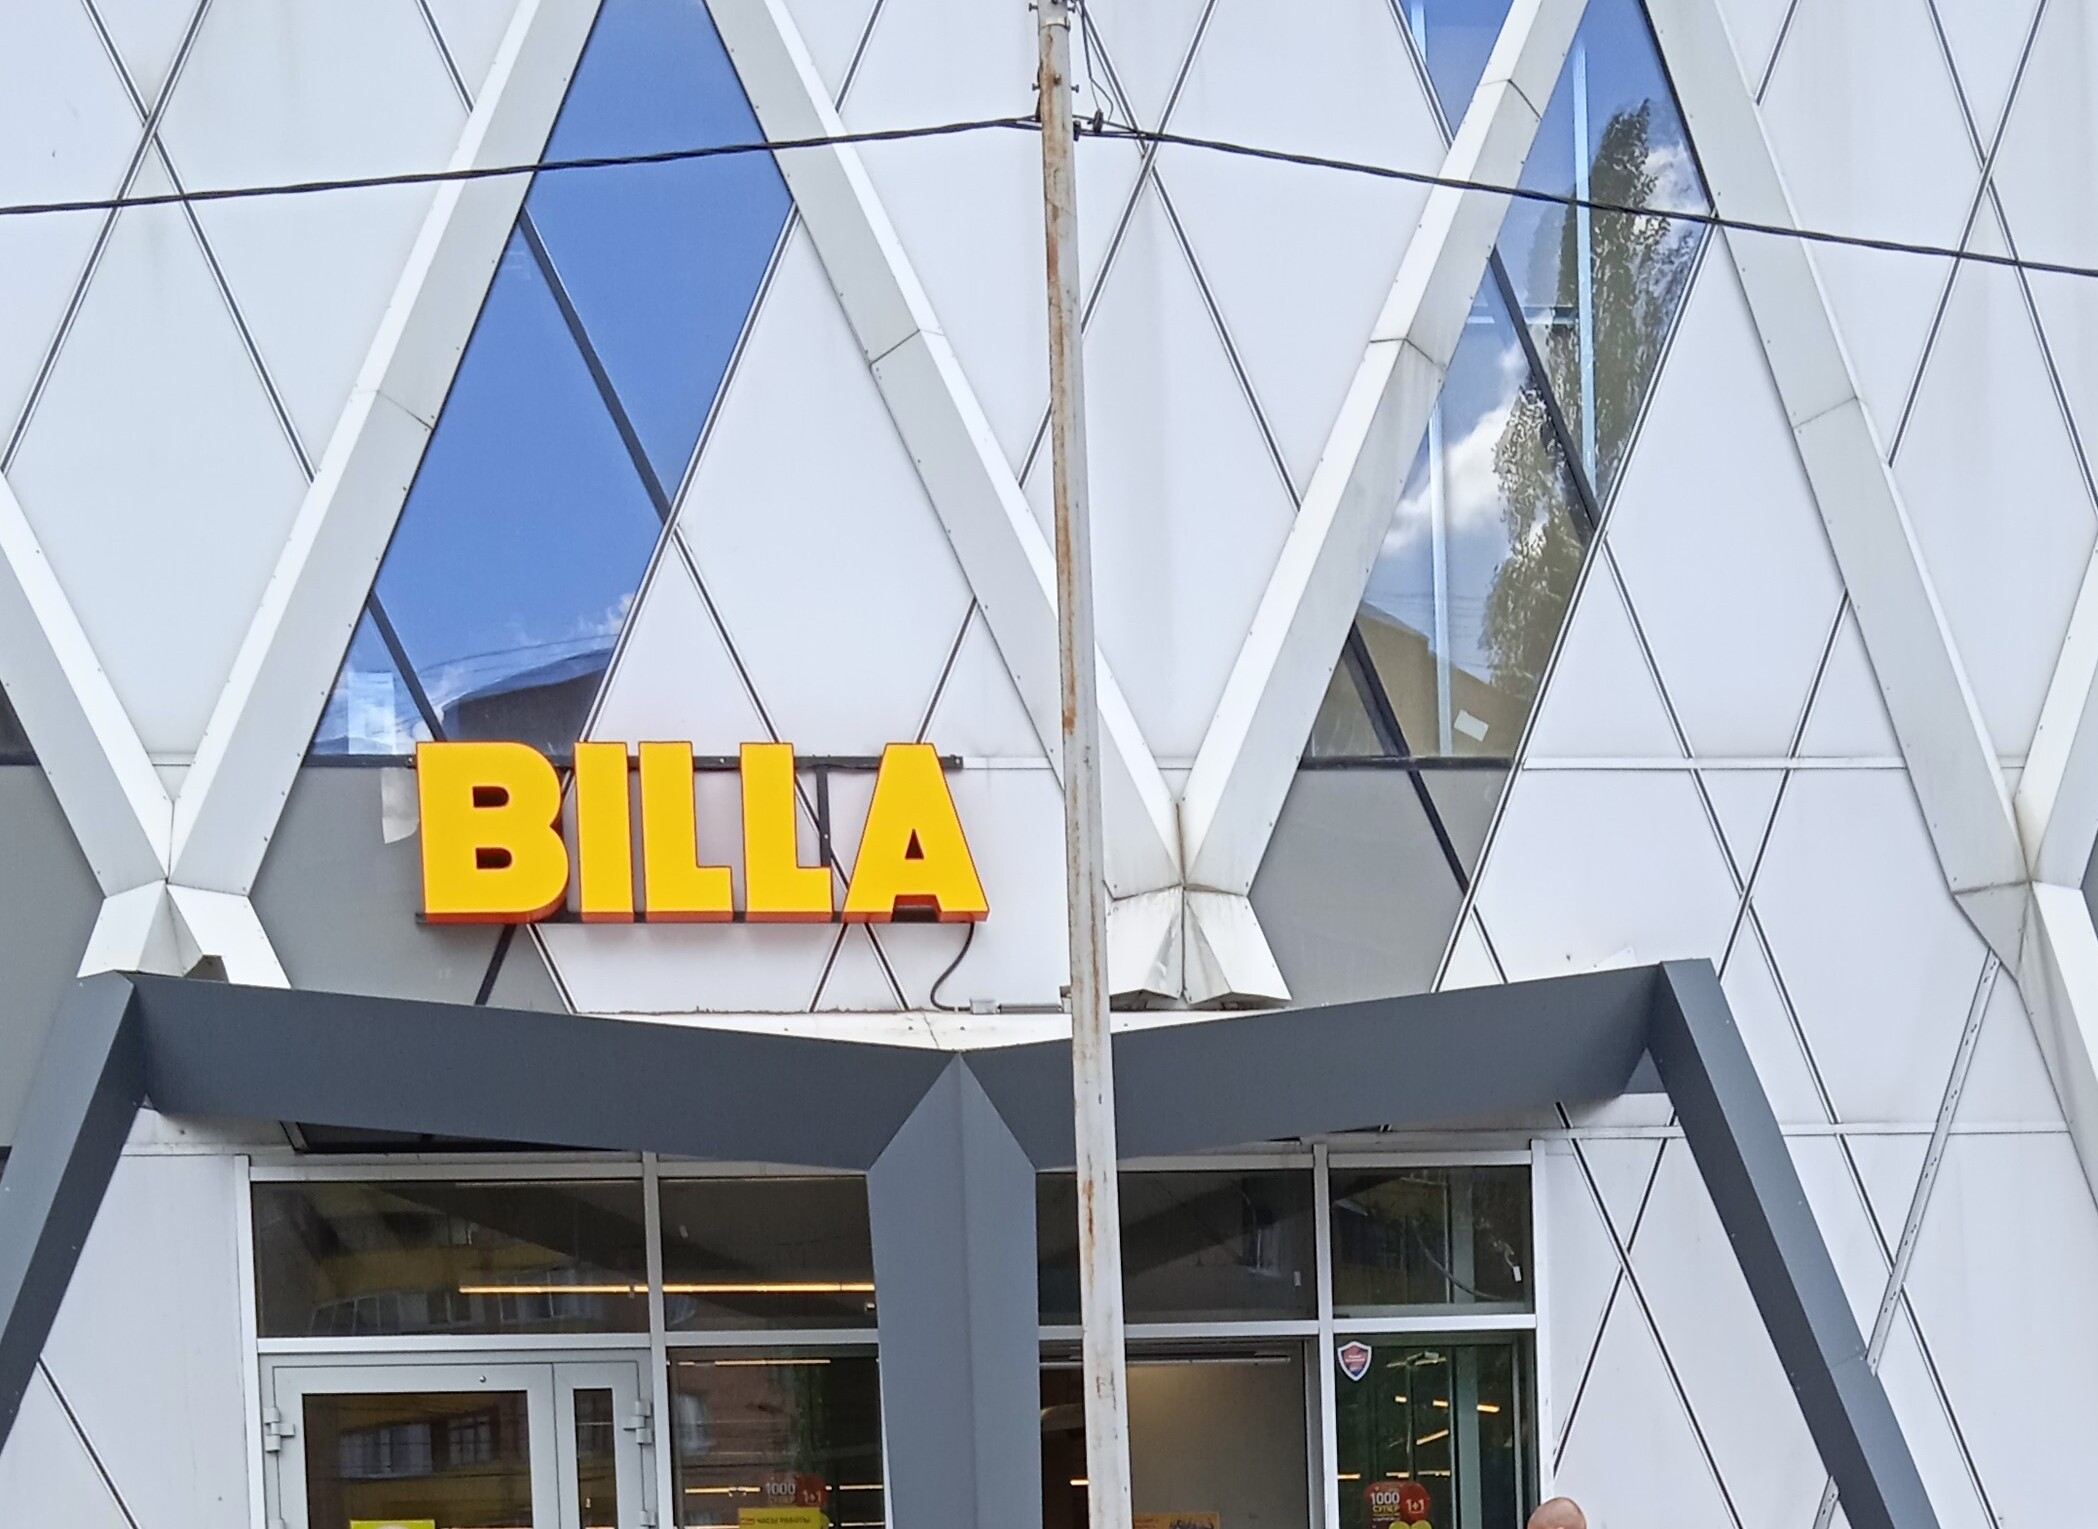 Lenta, one of top-10 Russian retailers, is purchasing Billa Russia GmbH to become the second largest food retailer in Moscow